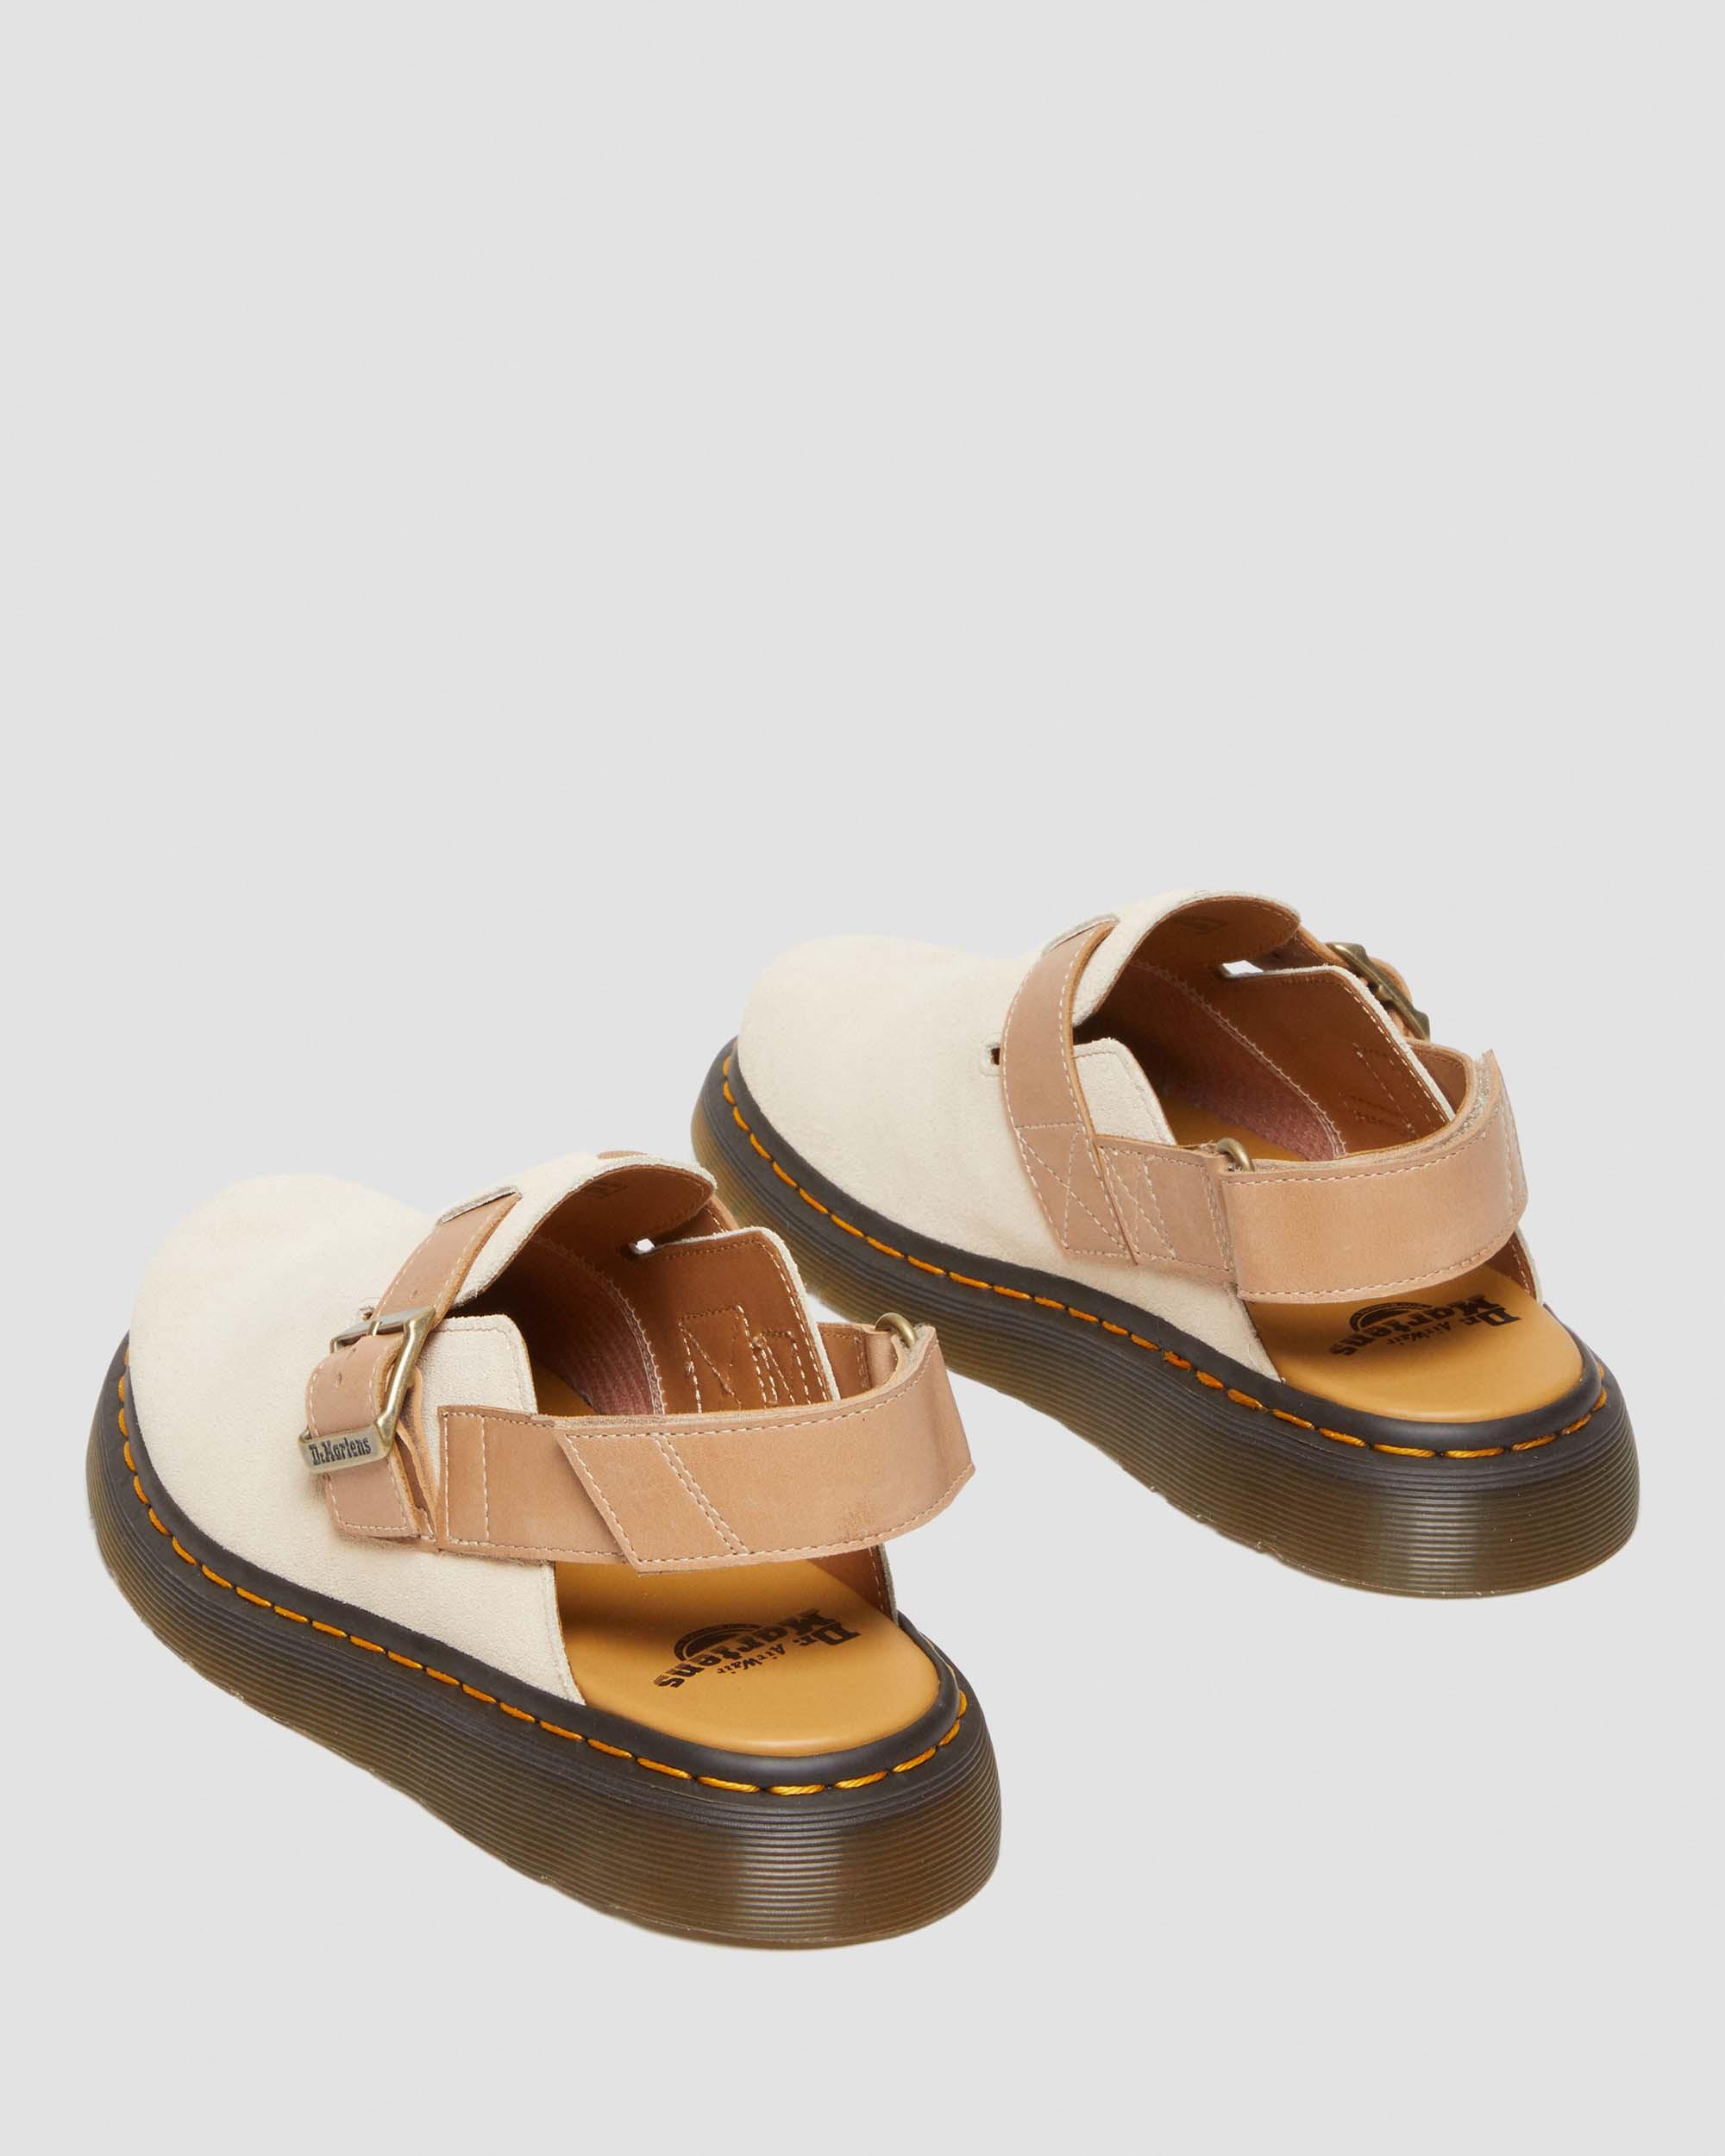 Jorge II Suede & Leather Slingback Mules in Parchment Beige+Beige